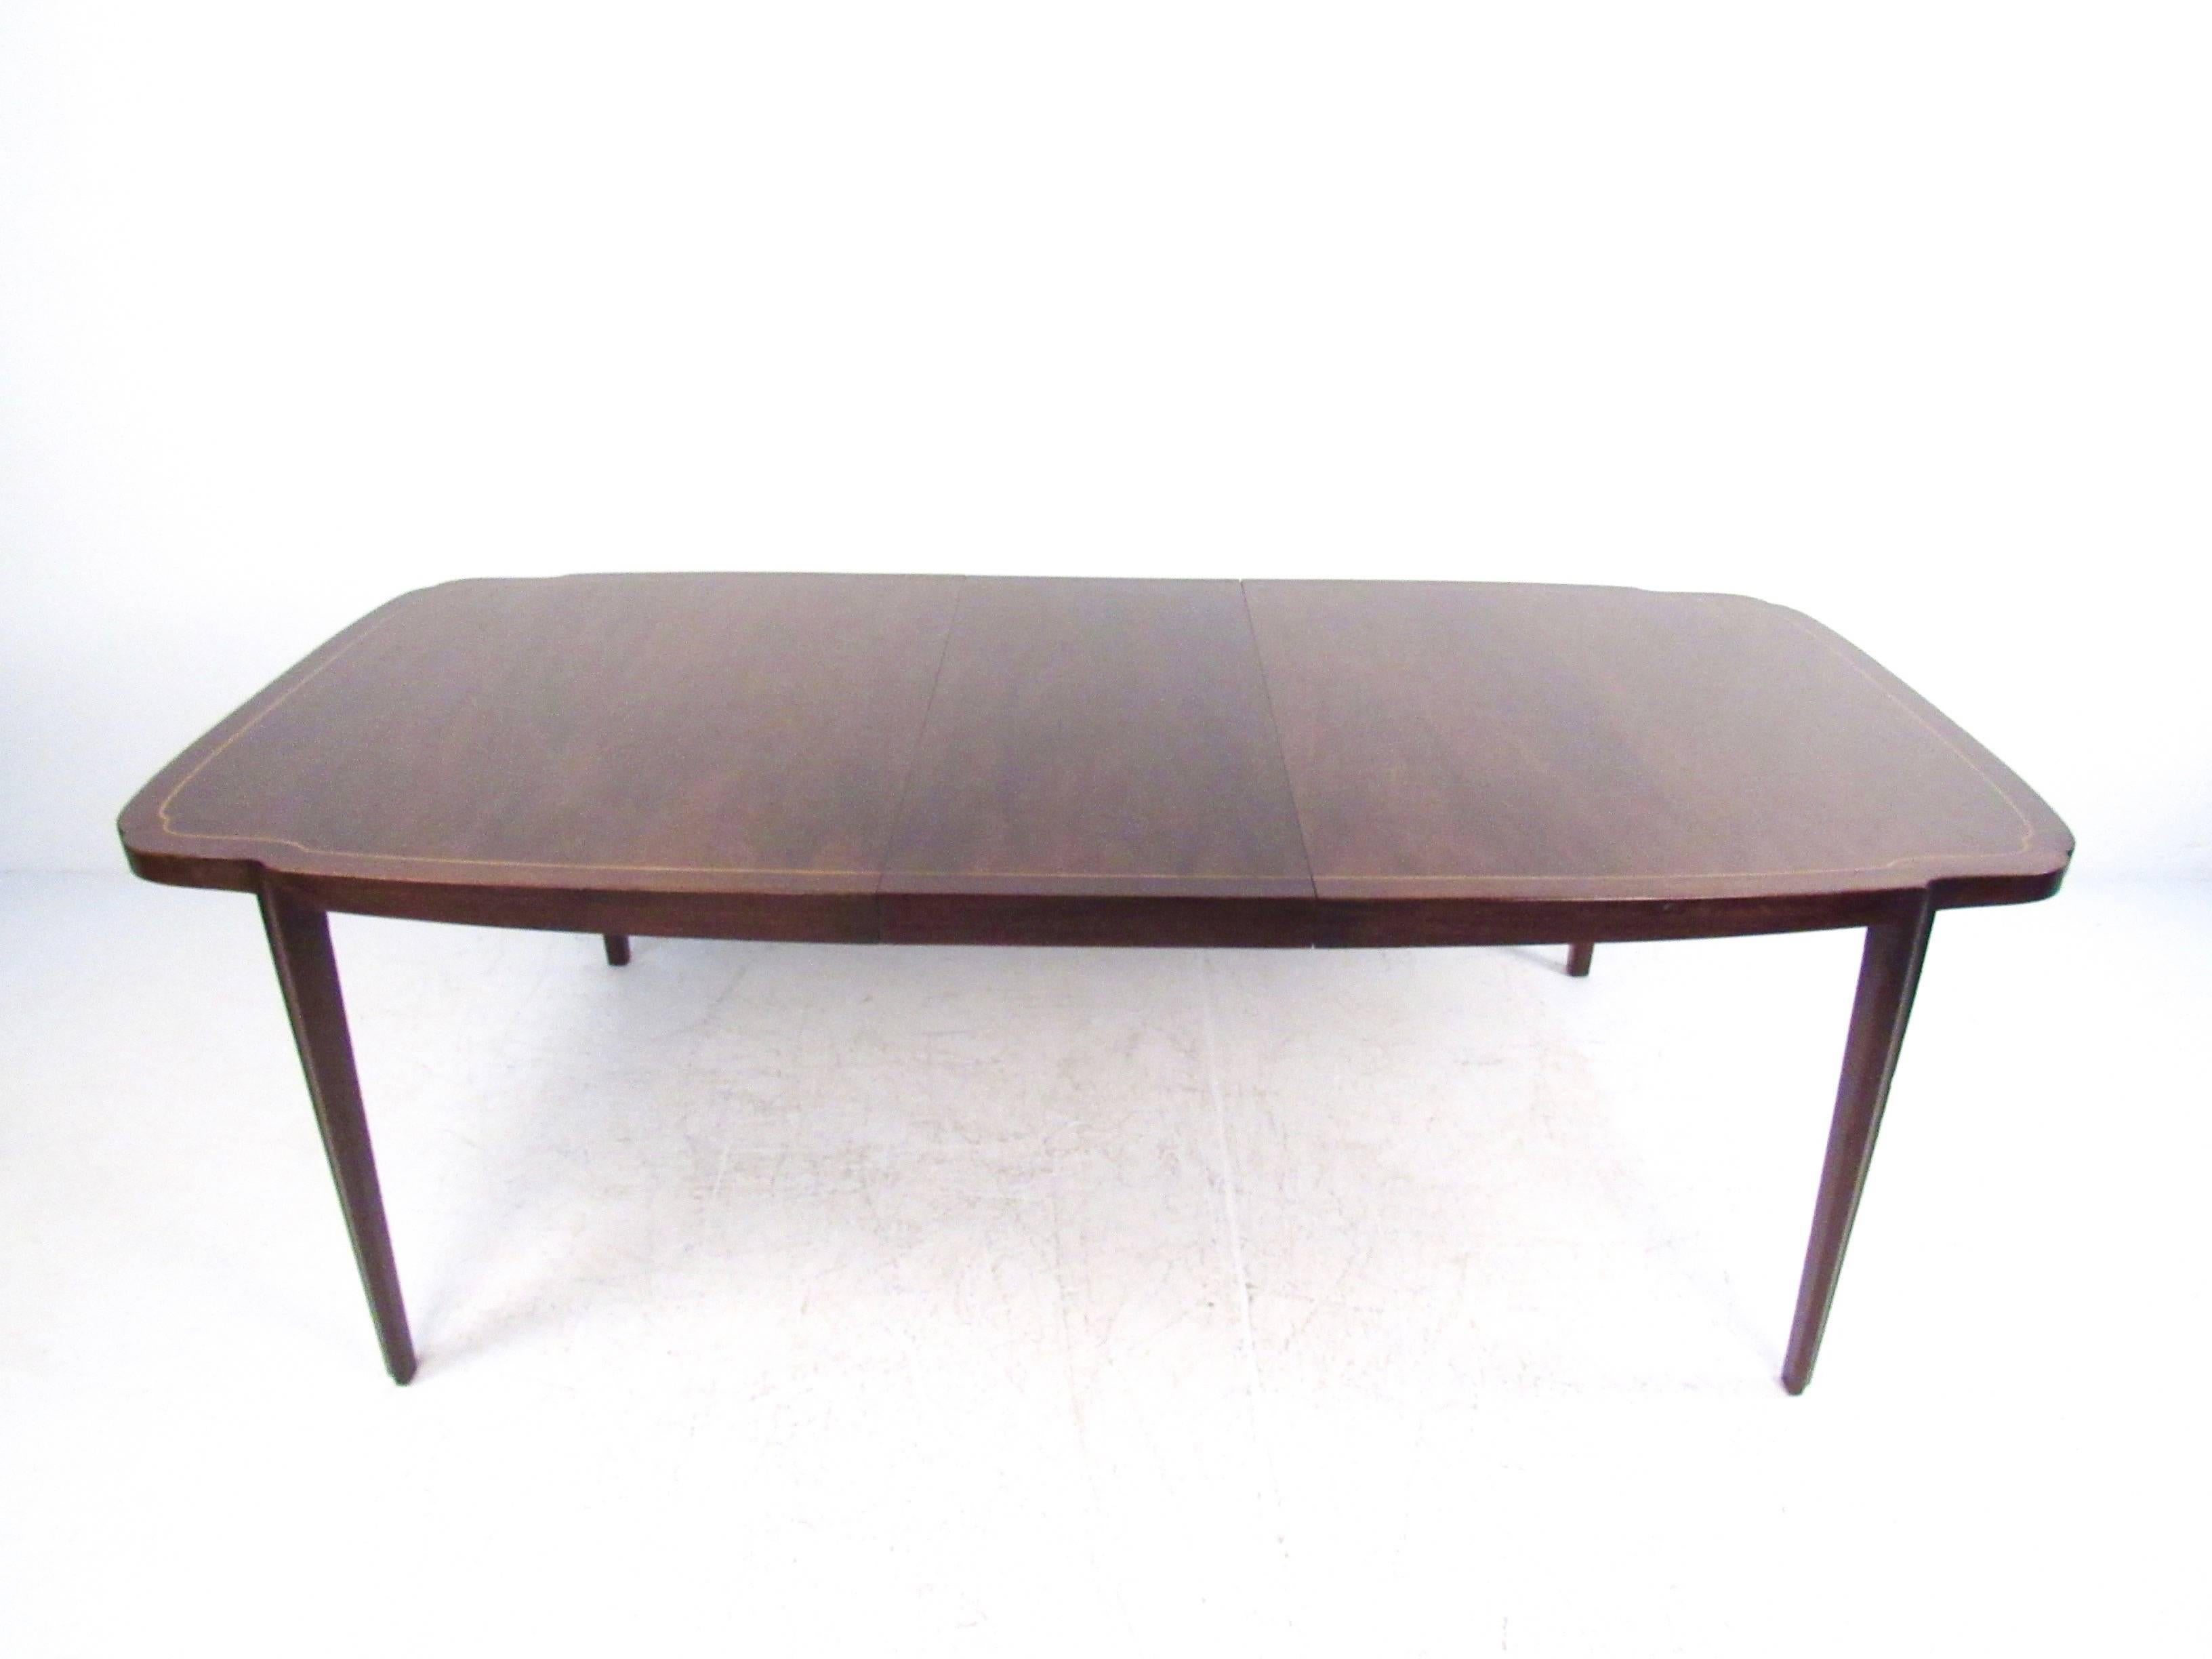 This exquisite lacquered dining table features uniquely shaped legs and an elegant cutaway tabletop complete with inlaid trim. Three eighteen inch leaves allow for this beautiful seventy-two inch table to expand to one hundred and twenty six inches